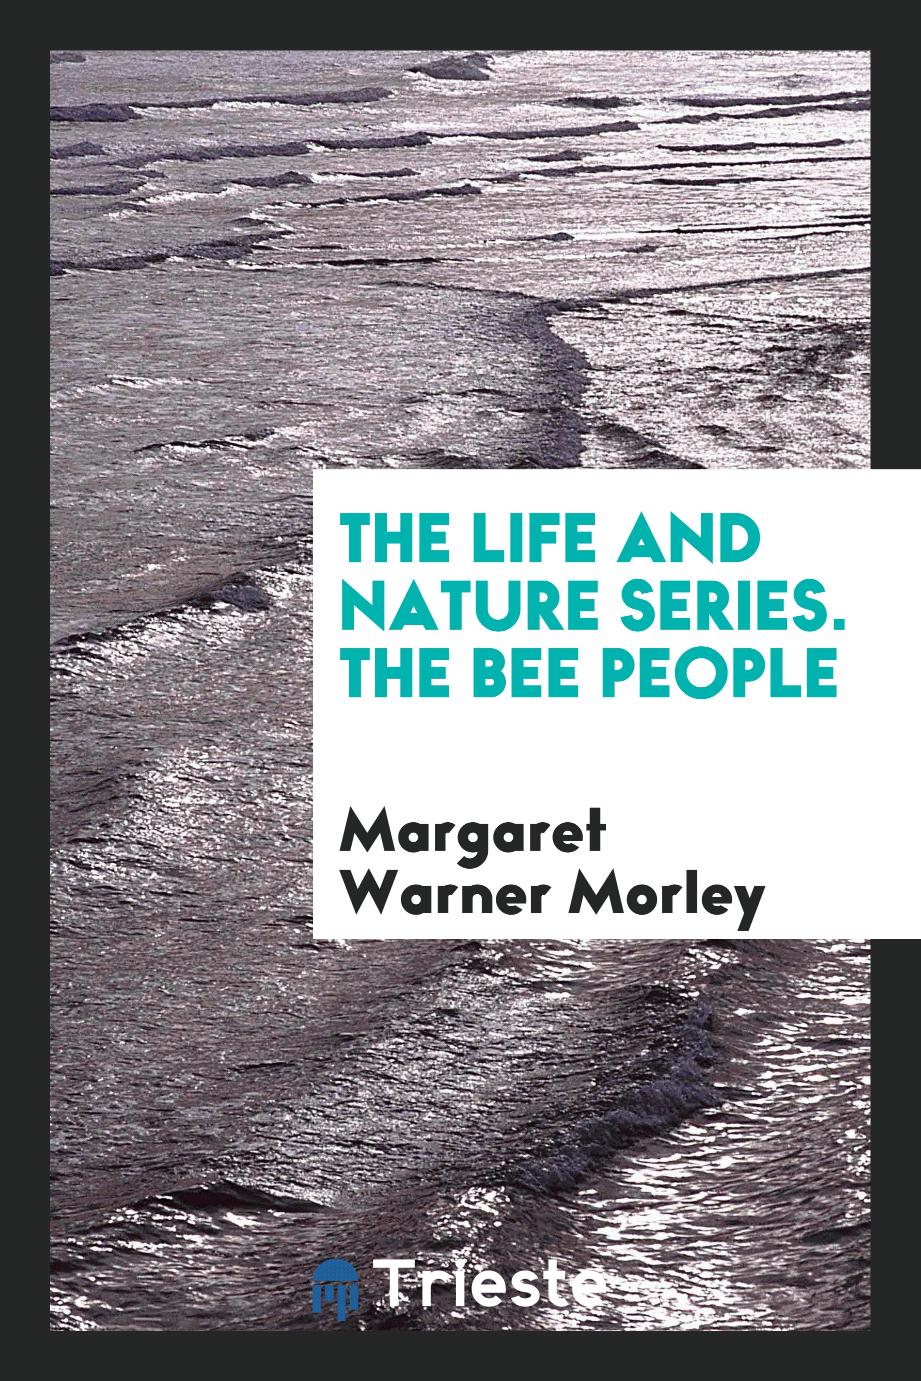 The Life and Nature Series. The Bee People